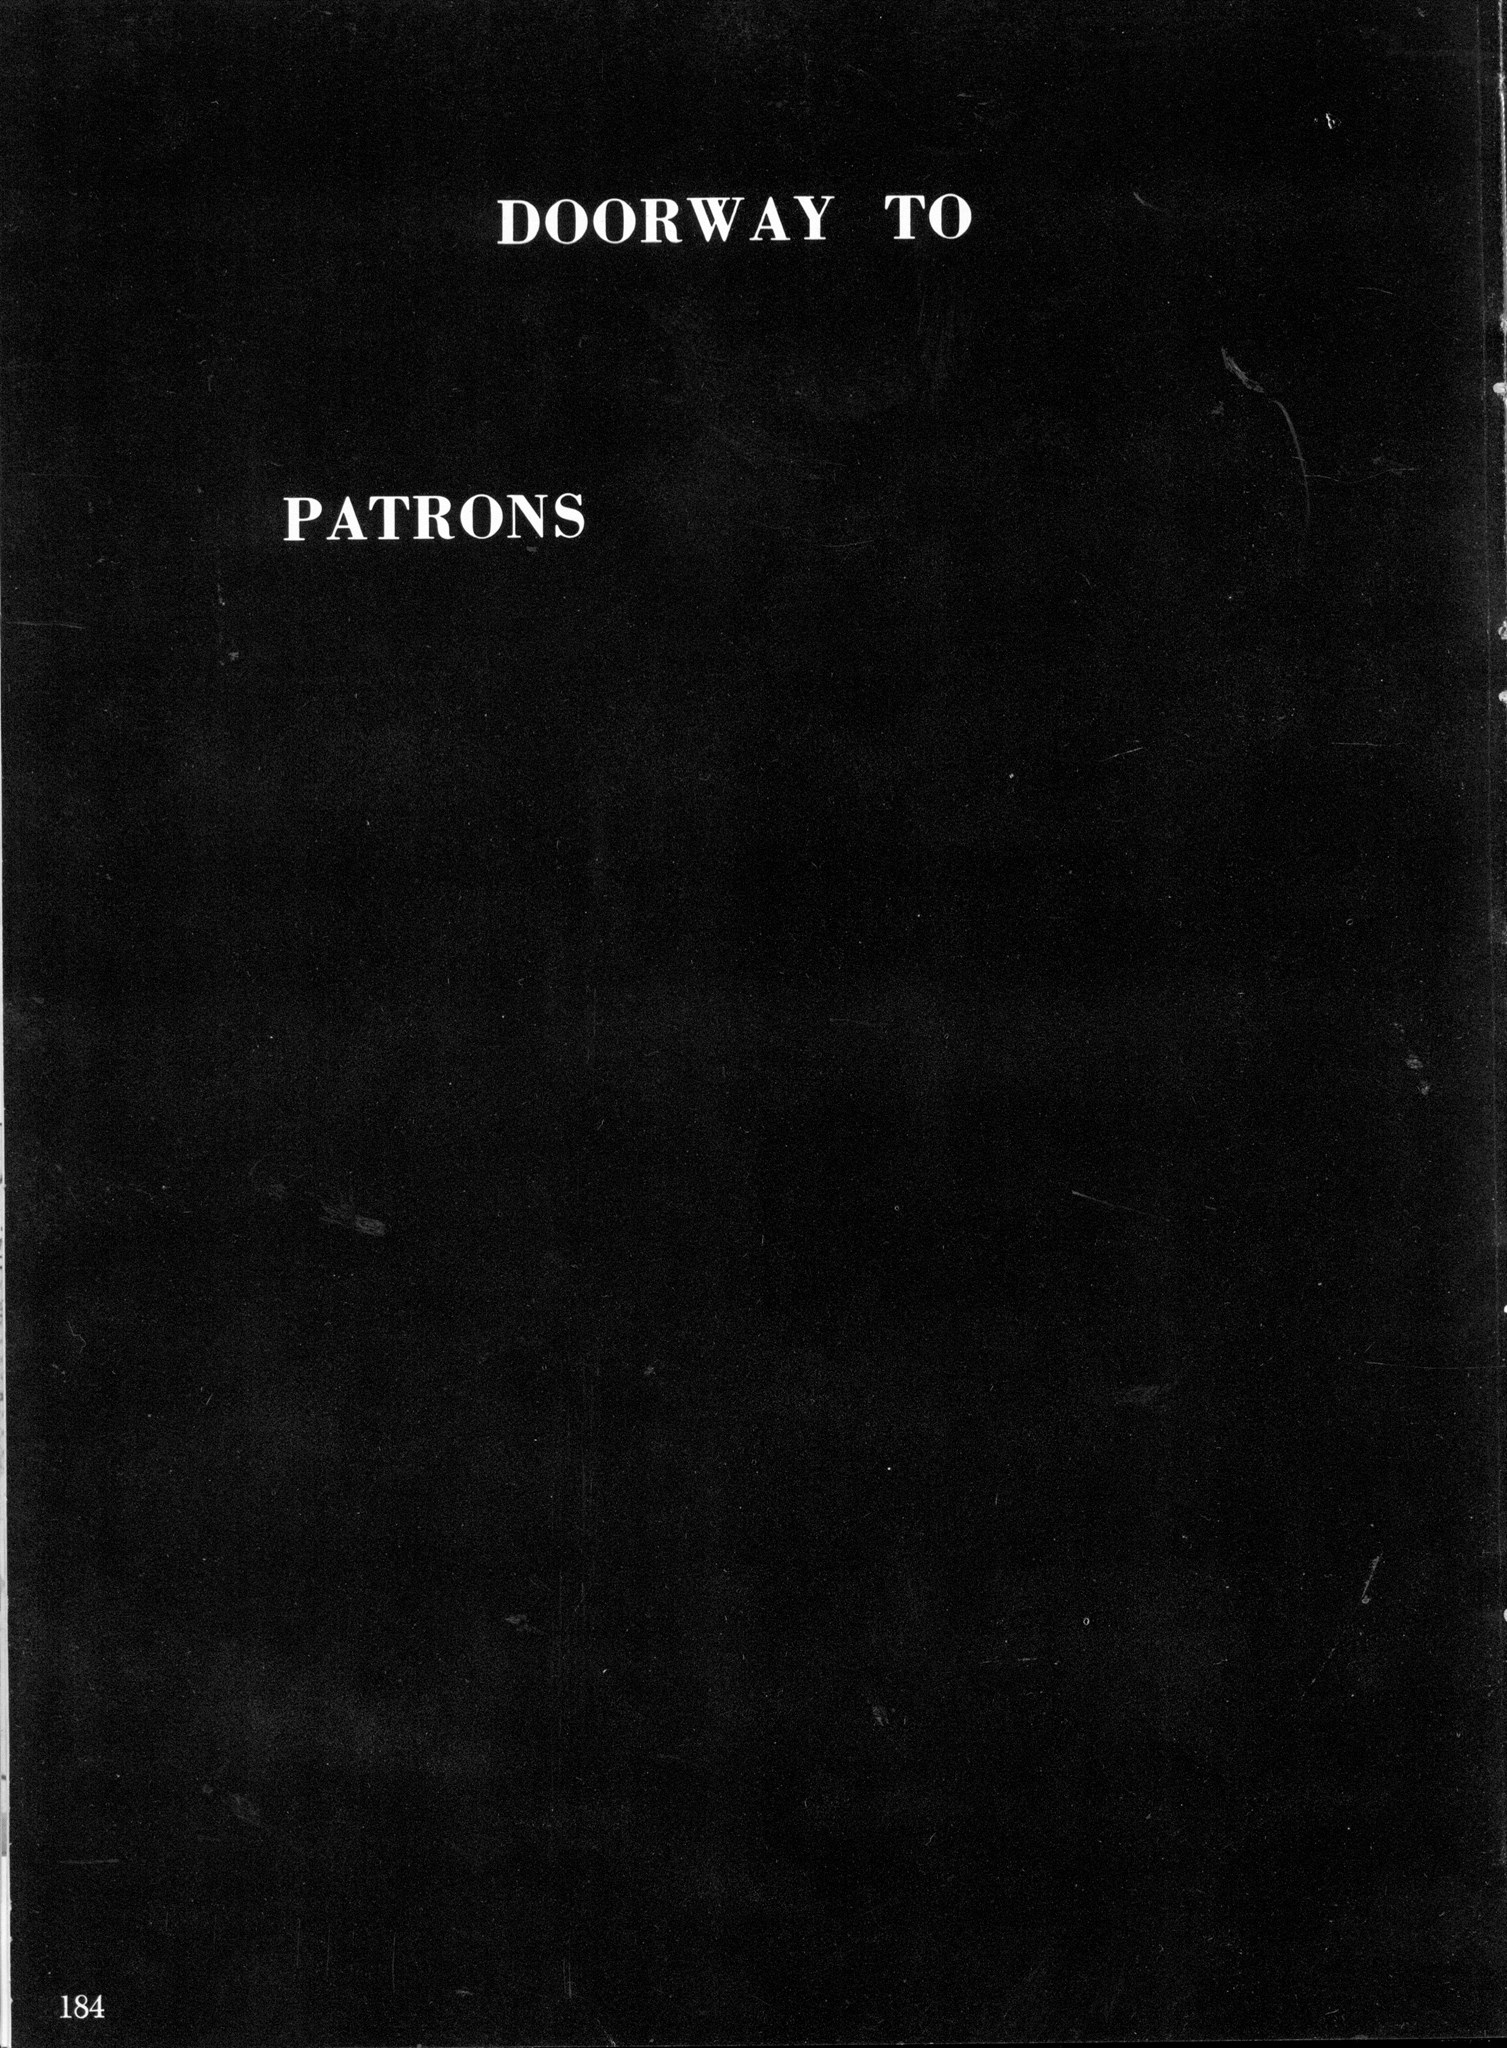 ../../../Images/Large/1959/Arclight-1959-pg0184.jpg